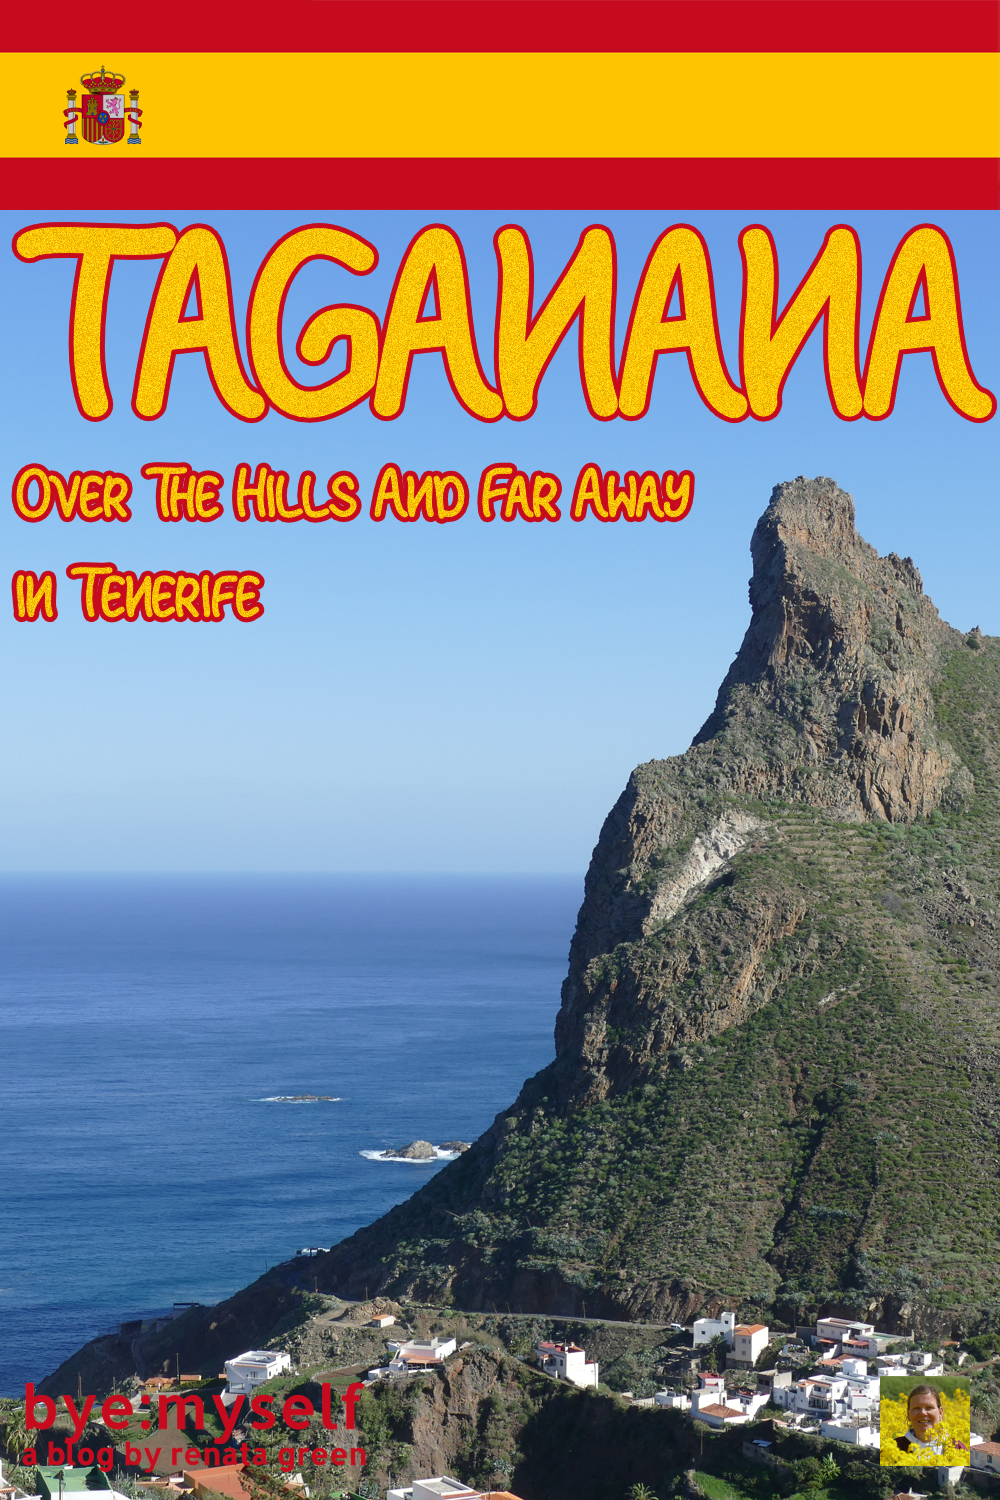 A bit over 20 kilometers north of the capital Santa Cruz, Tenerife hides one of its greatest treasures, namely the mountain village of Taganana, where you get to know another side of the island. So let's go over the hills and far away. #taganana #mountainvillage #anaga #anagaforst #nationalpark #anagaruralpark #unesco #tenerife #canaryislands #spain #hike #beaches #solotravel #byemyself